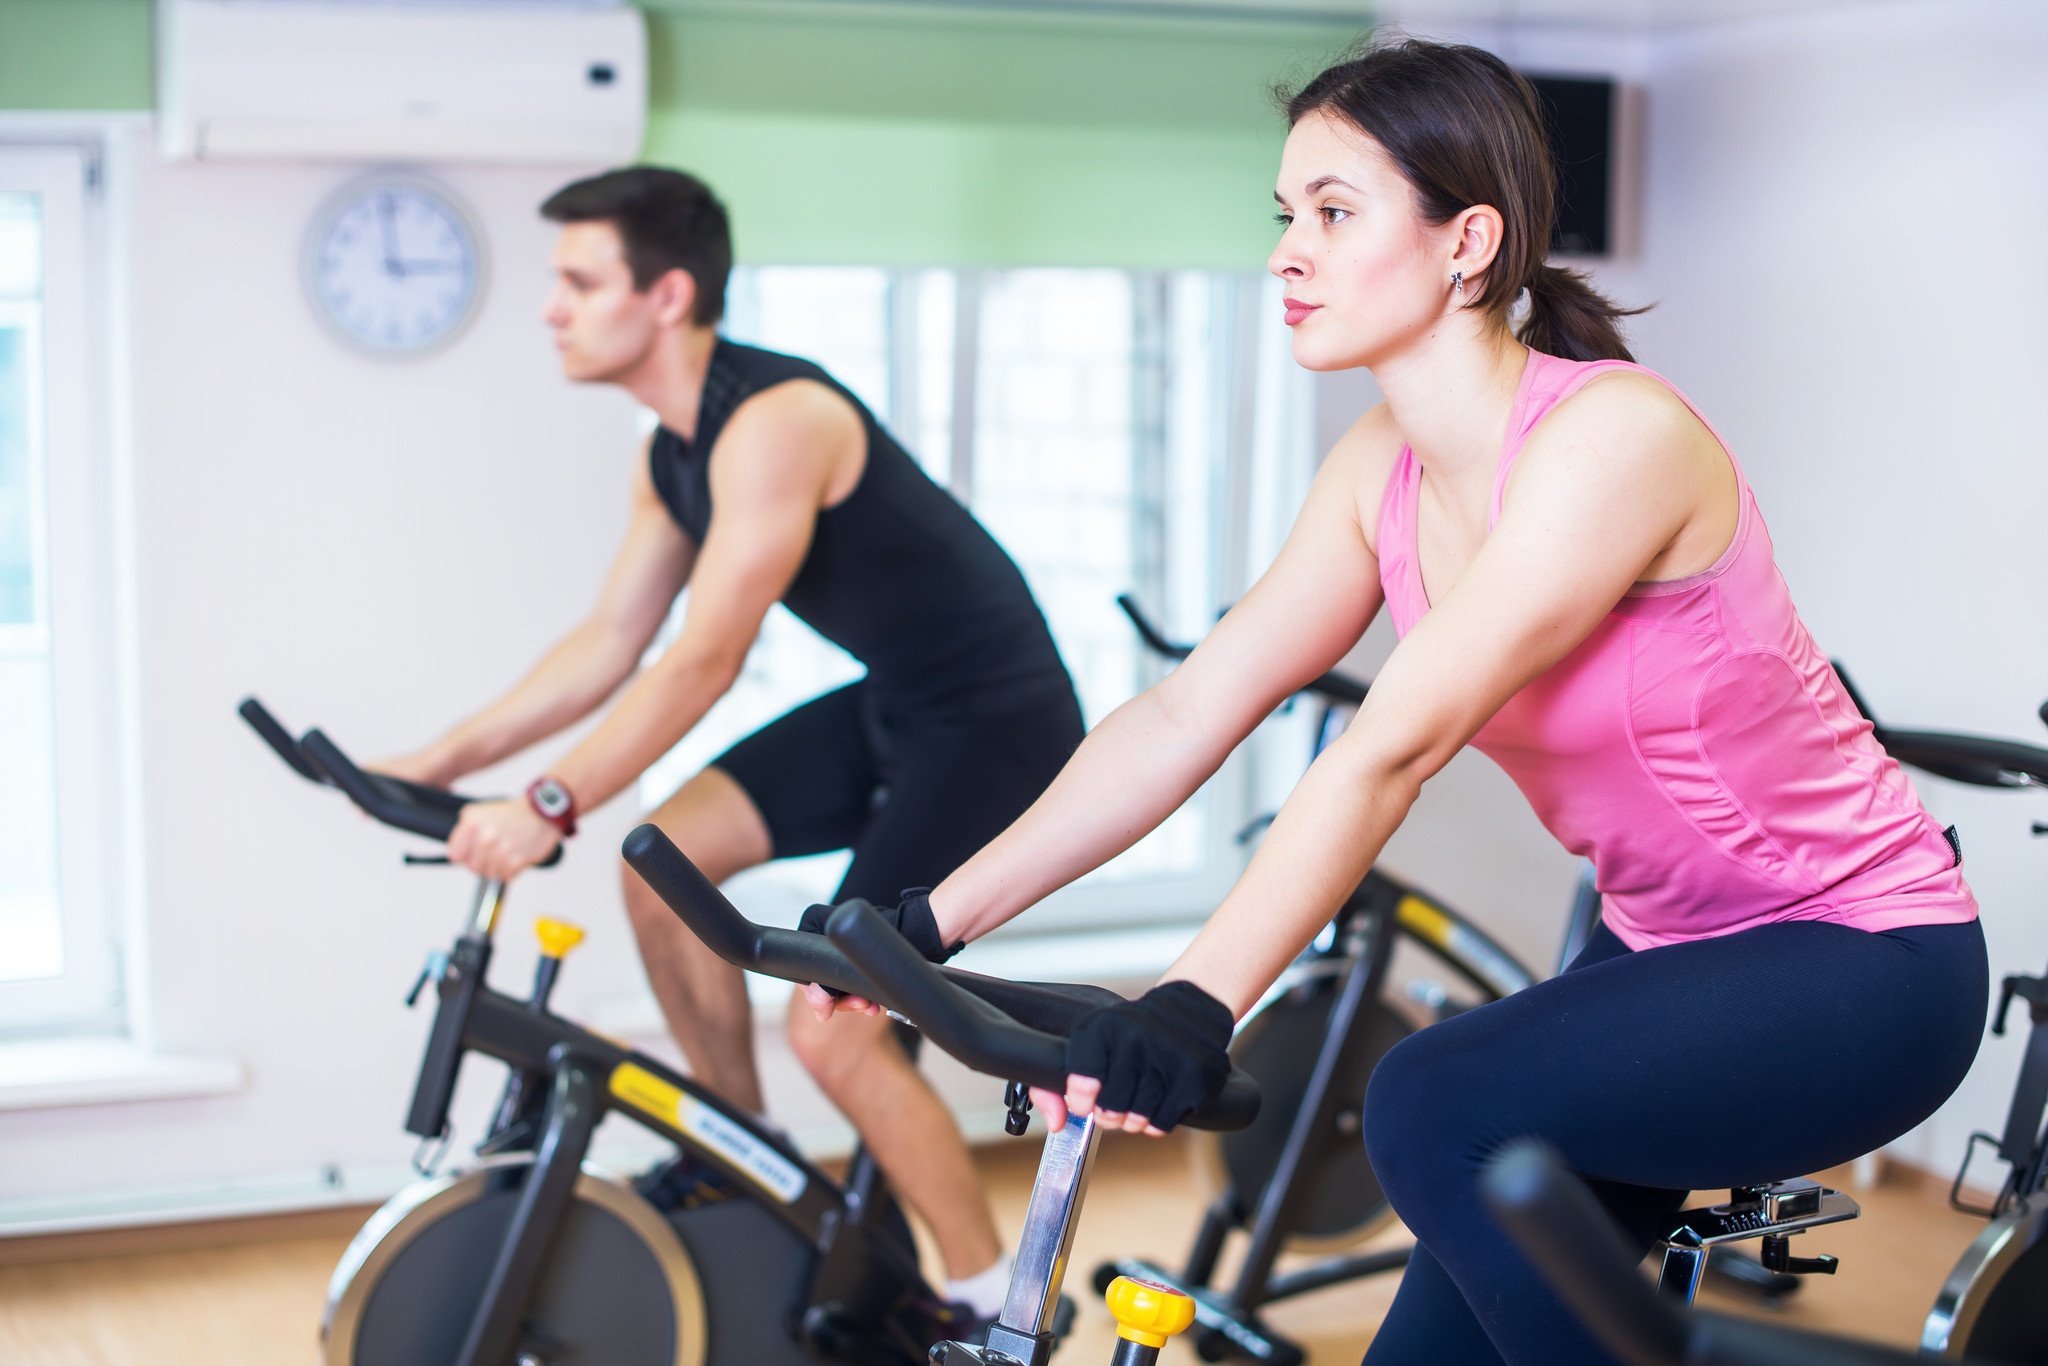 8 Common Problems with Spin Bikes and How to Fix them